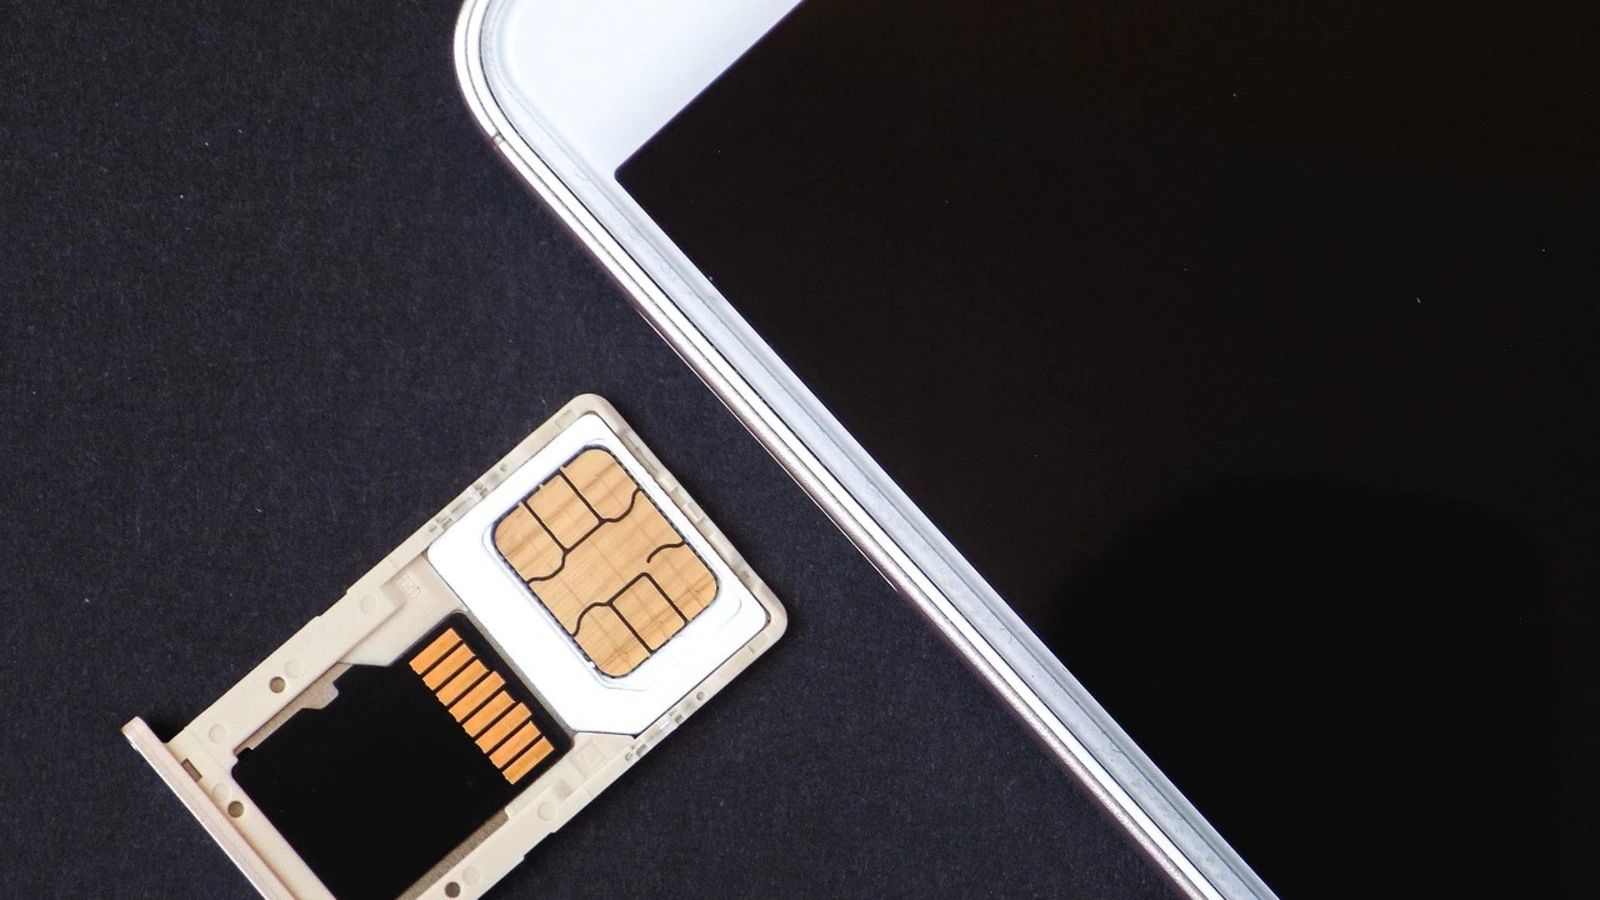 Changing SIM Card In IPhone 5C: A Step-by-Step Guide